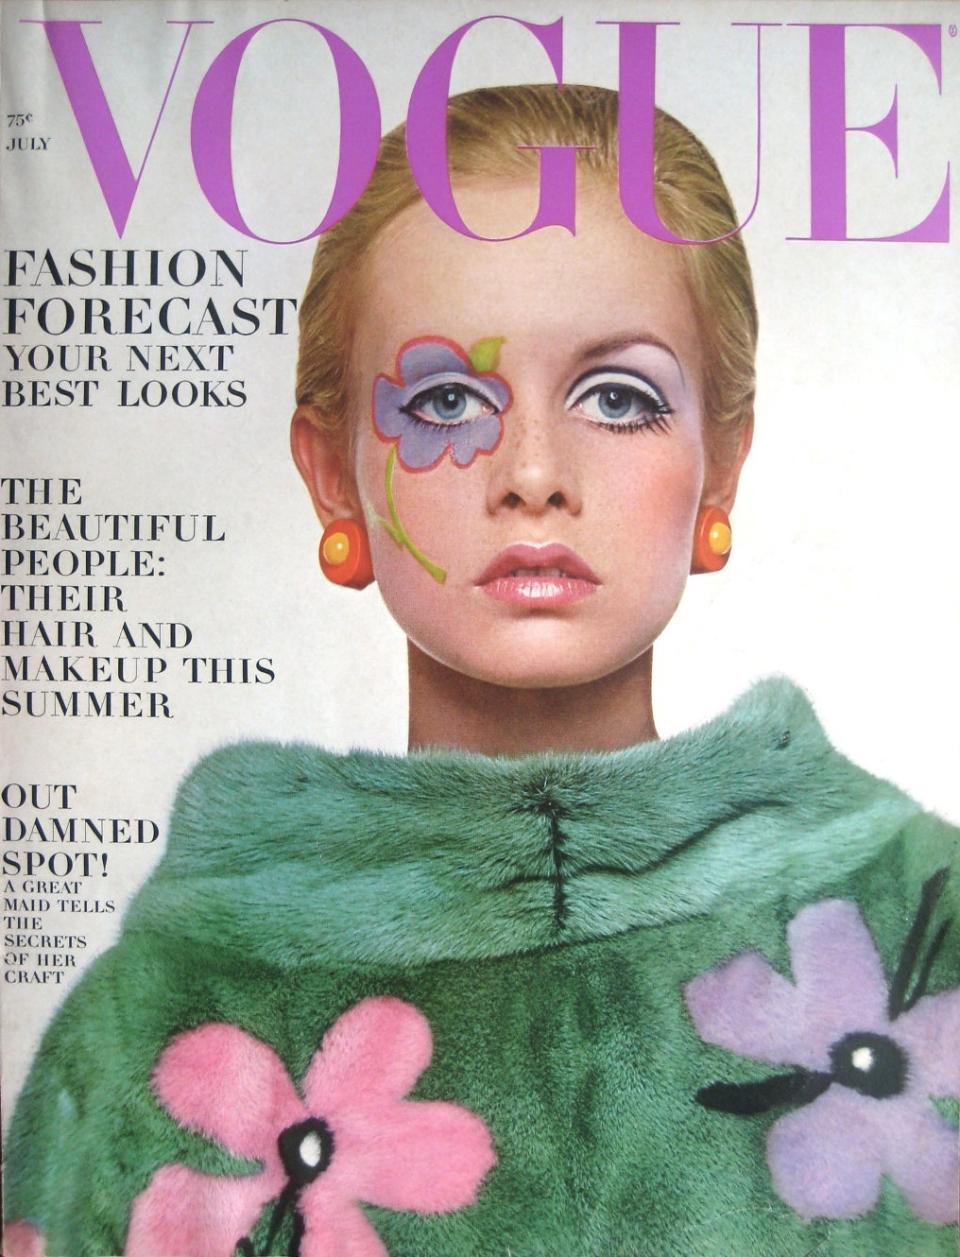 Vogue makes Twiggy the the face of 1960s flower power as their June 1967 cover girl.